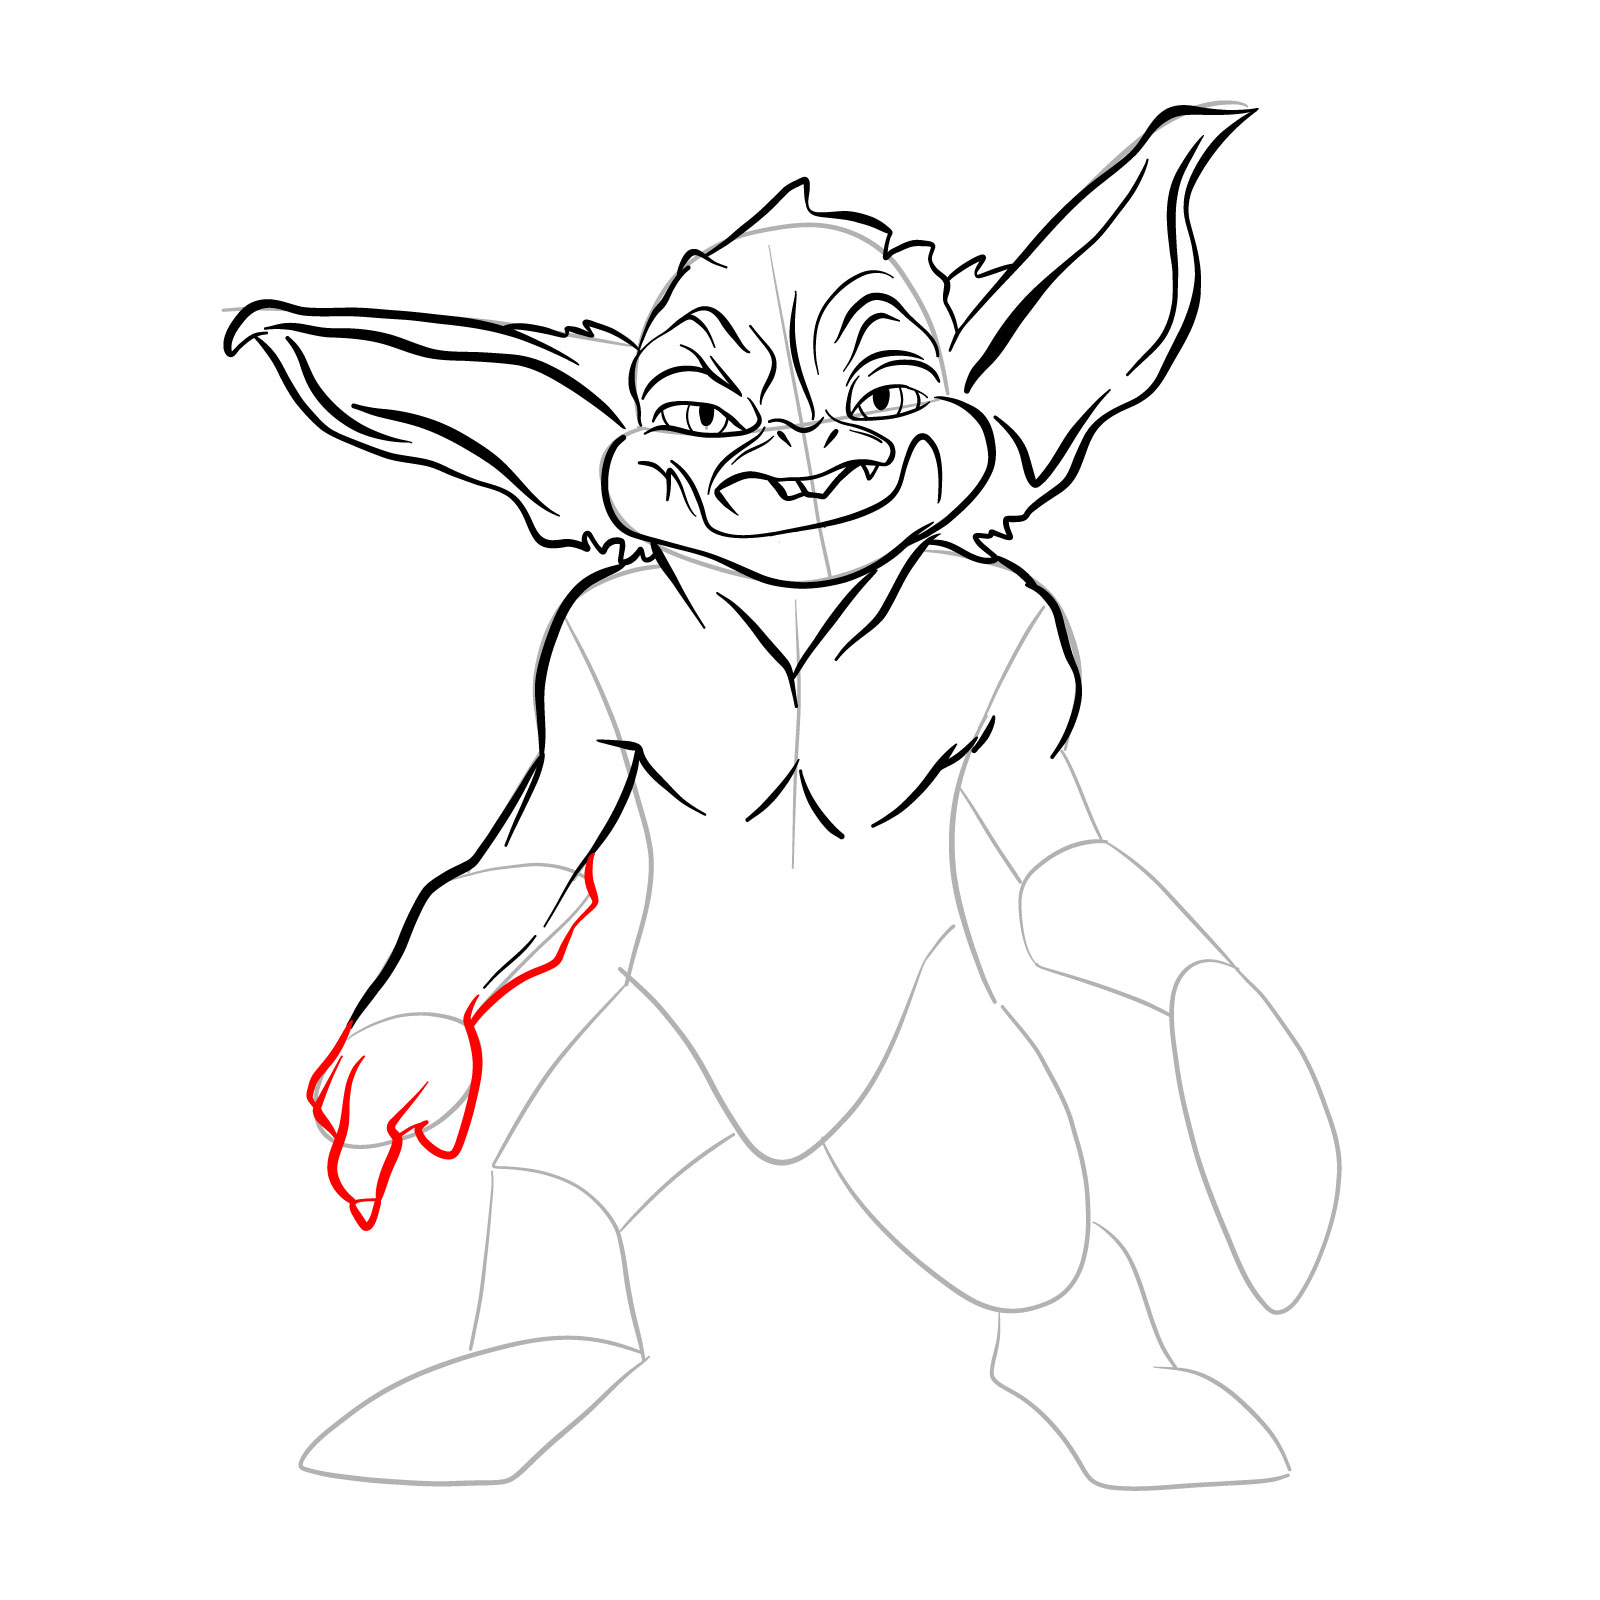 How to draw a Goblin - step 18